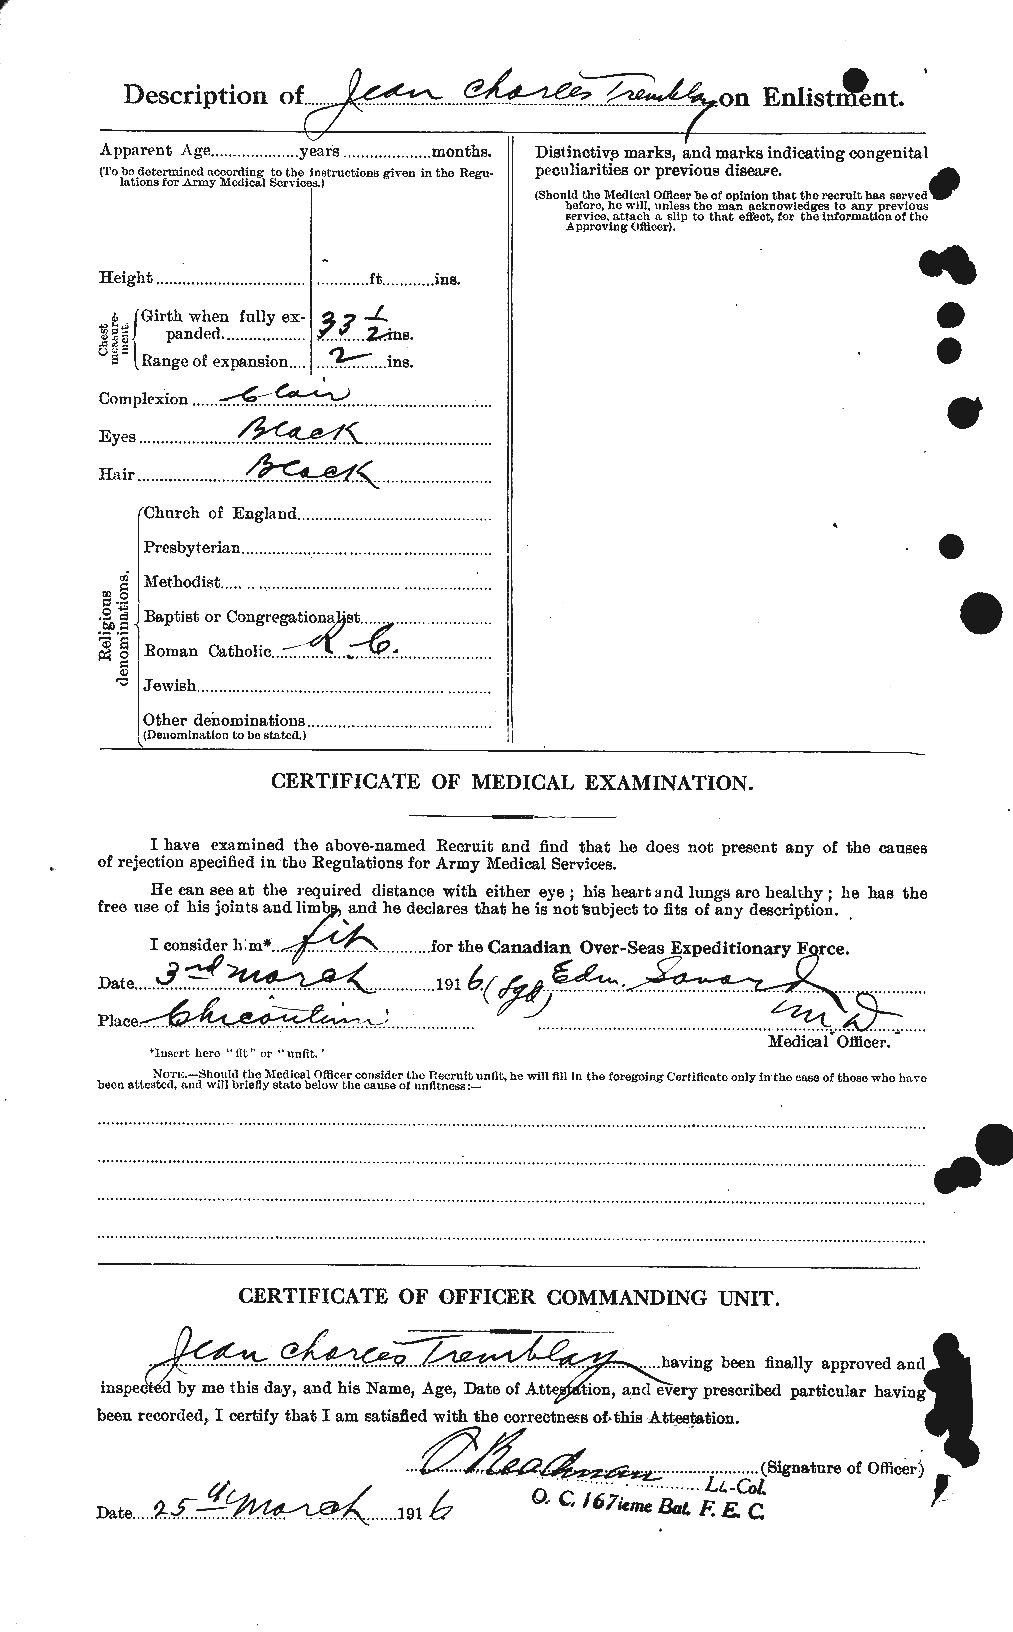 Personnel Records of the First World War - CEF 639100b